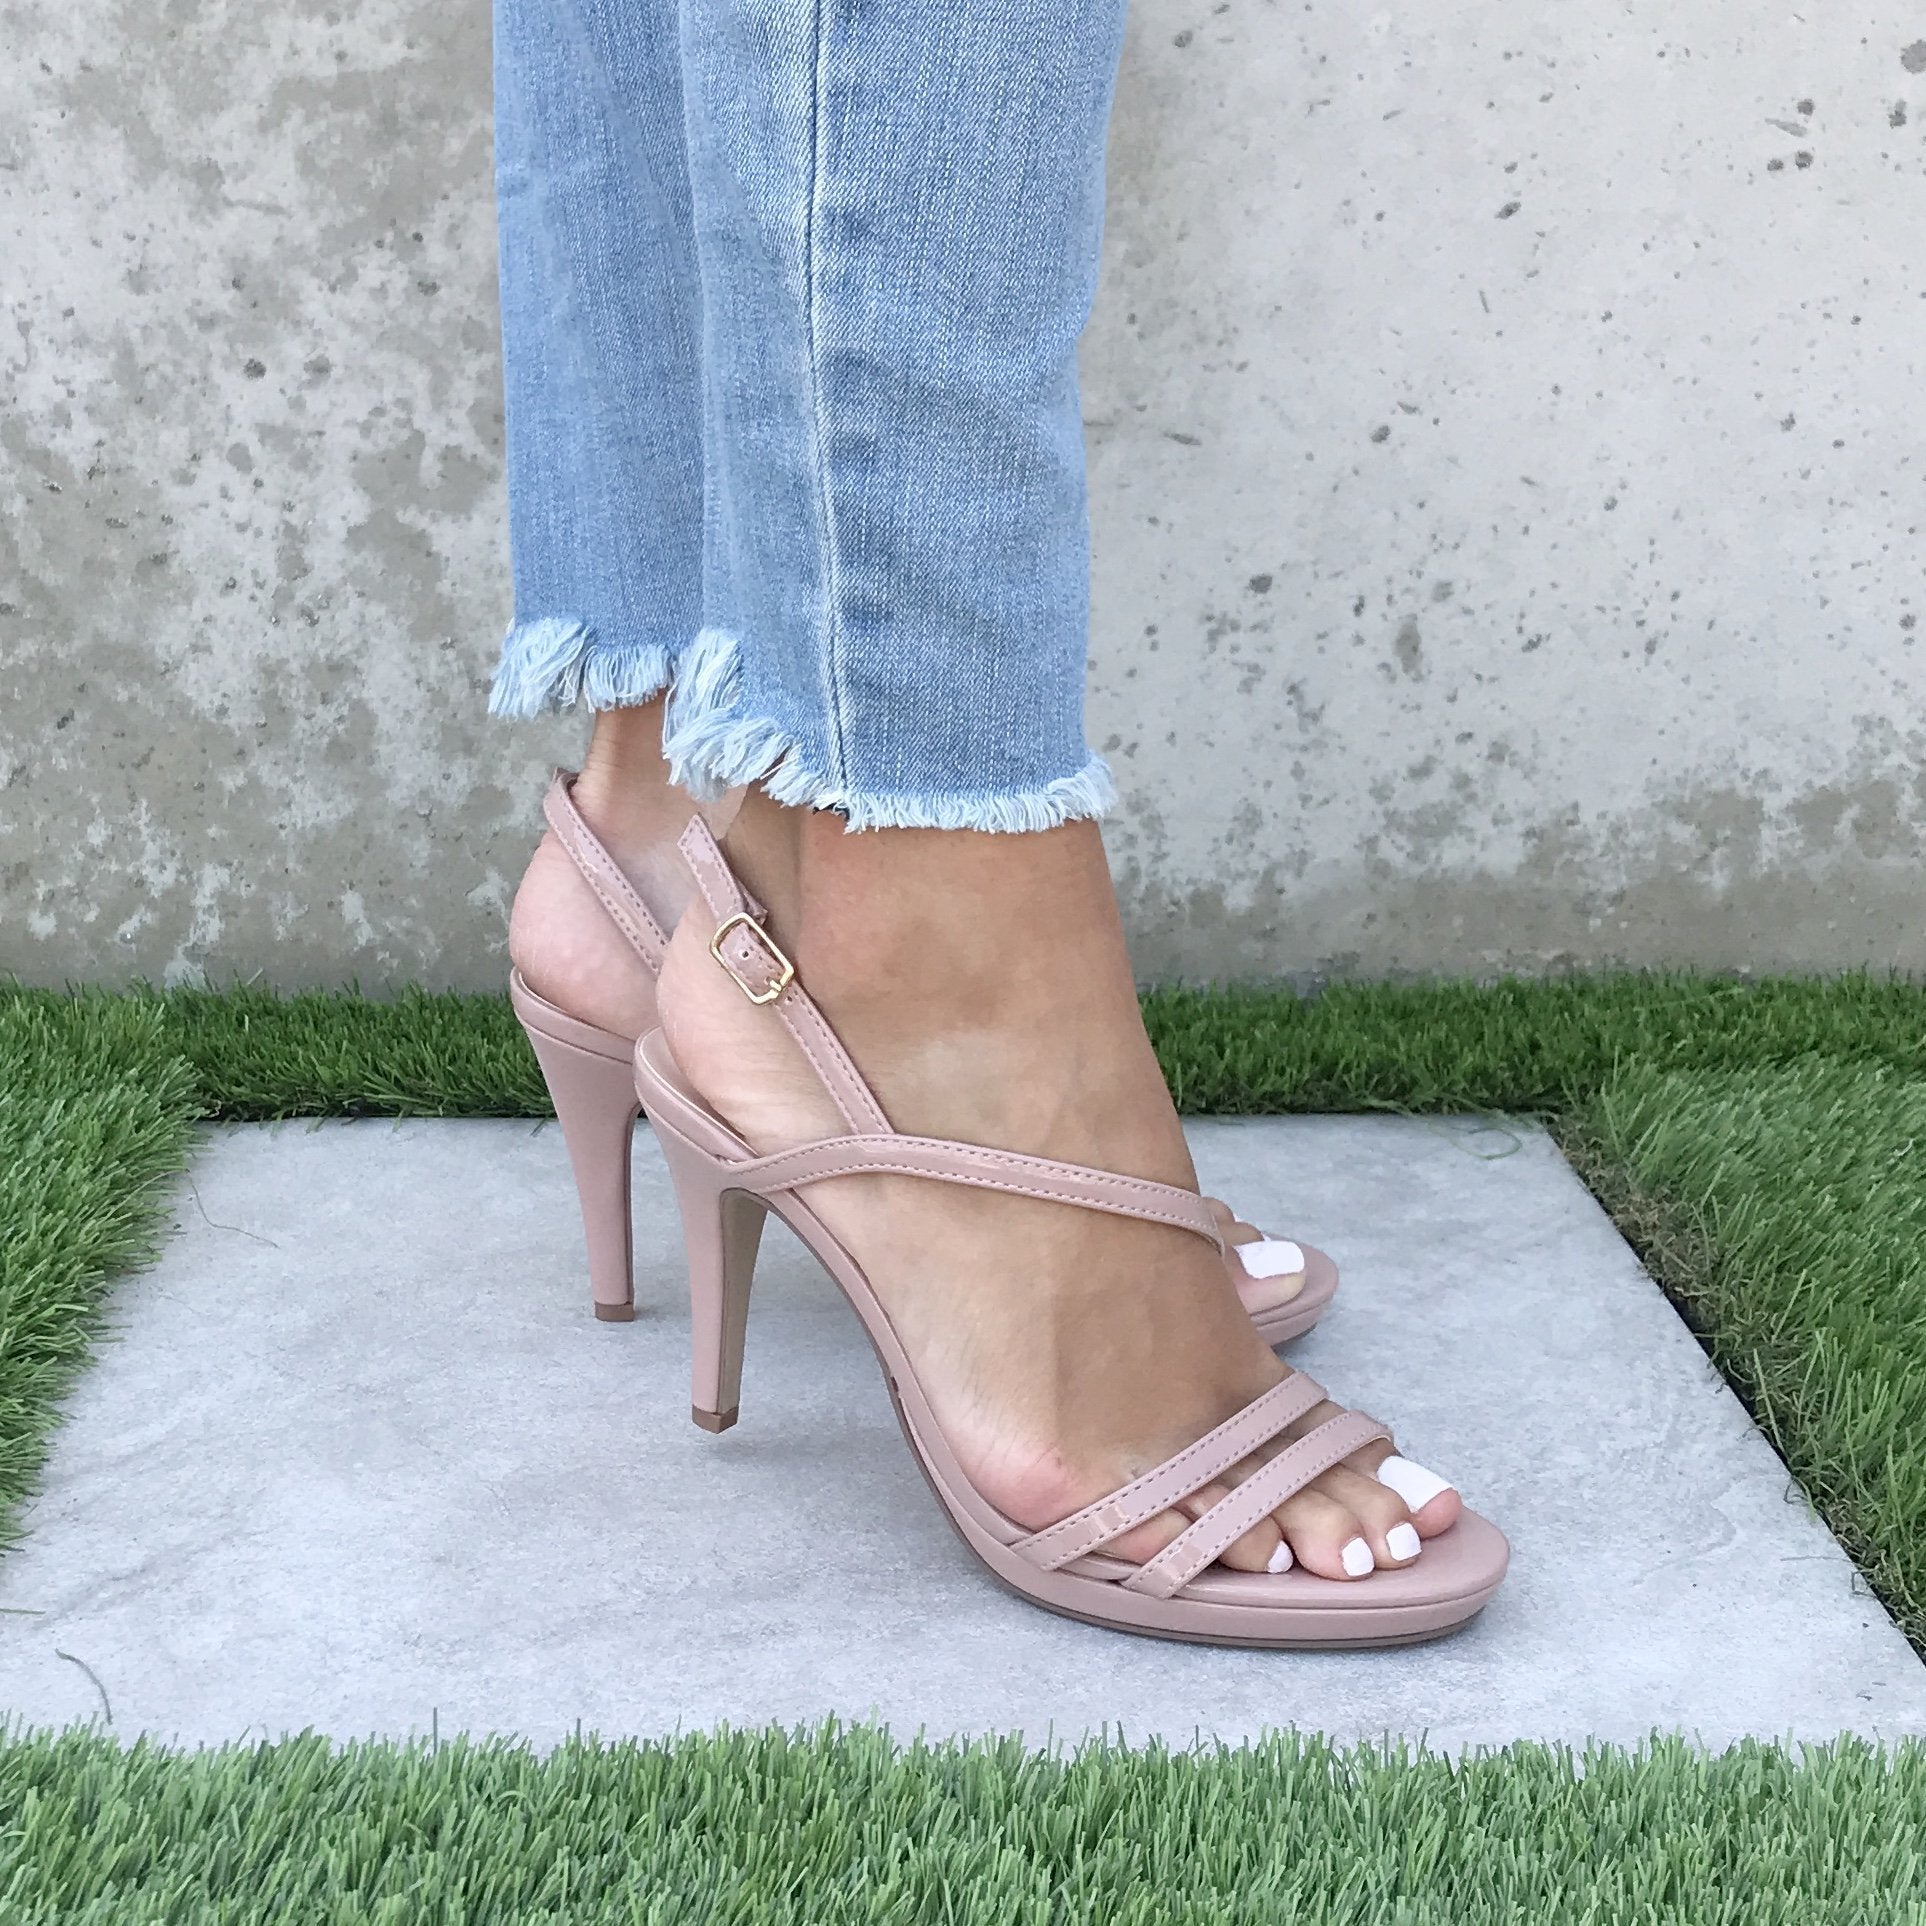 Upgrade Open Toe Patent Leather Heels In Mauve Pink - Dainty Hooligan